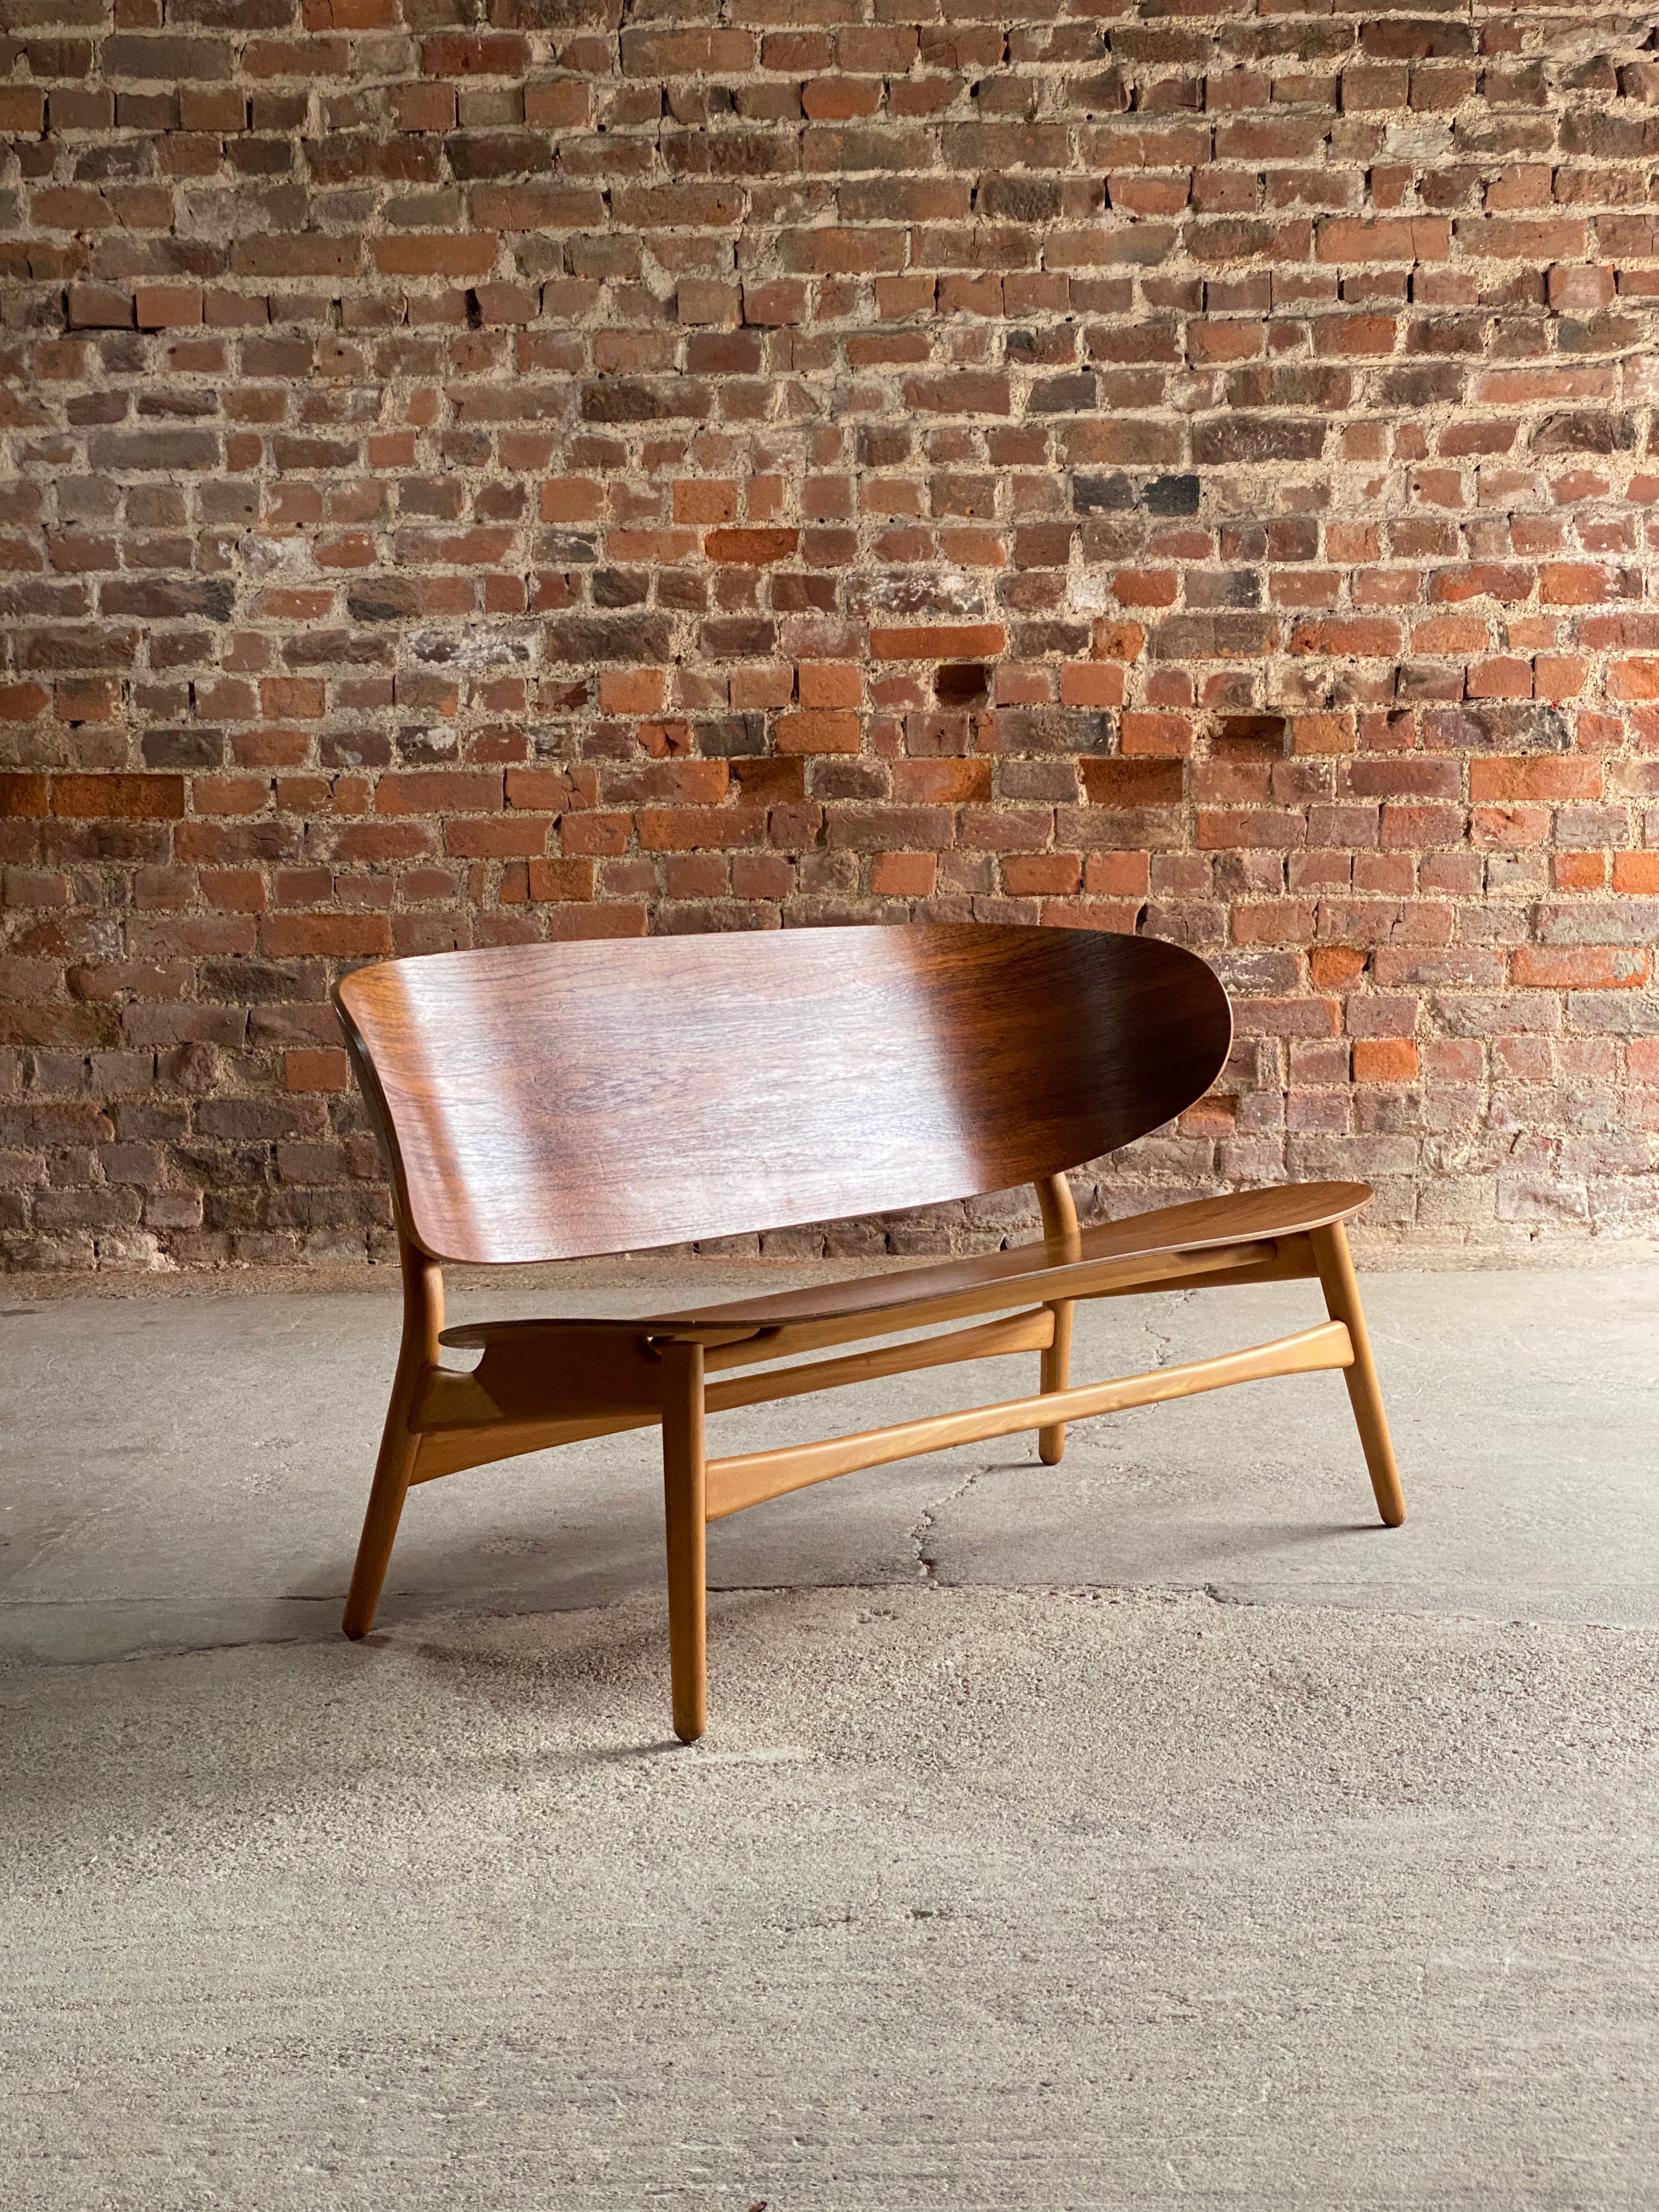 Hans Wegner shell settee Model 1935 by Fritz Hansen Denmark 1950

Hans J Wegner shell settee Model 1935 by Fritz Hansen Denmark circa 1950, this extremely rare and coveted collectors piece features a laminated teak shell back and seat, raised on a